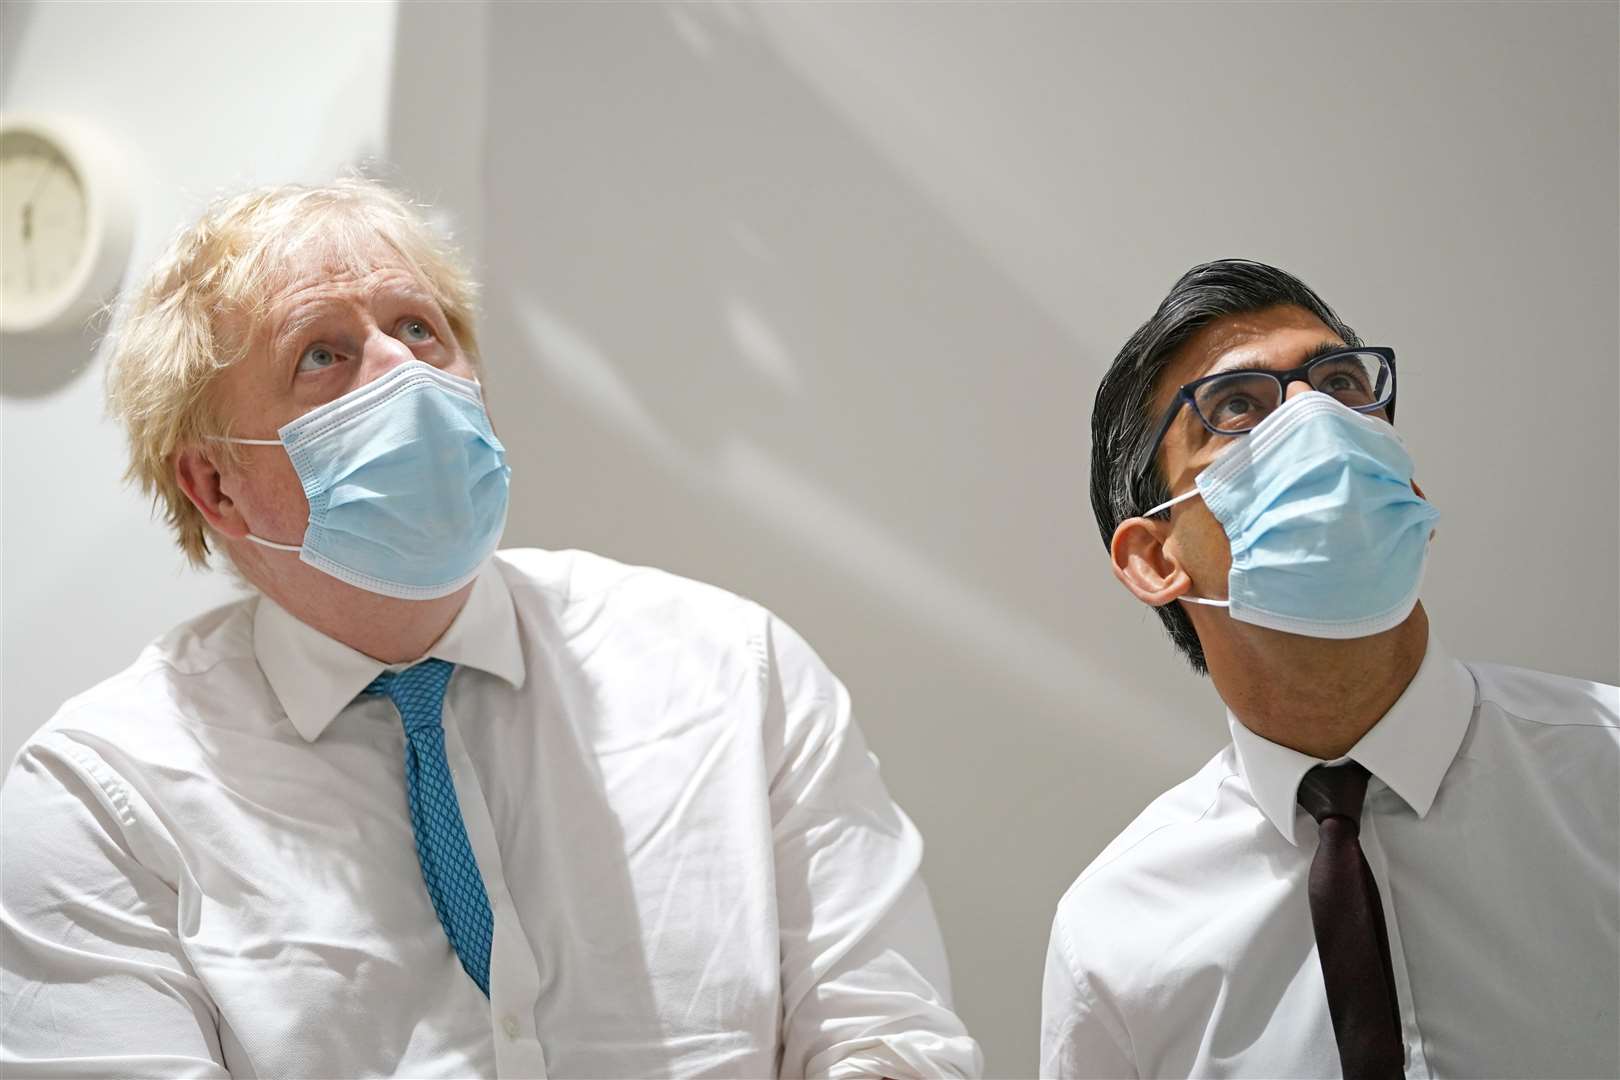 Prime minister Boris Johnson and chancellor Rishi Sunak during a visit to Maidstone Hospital – in April the pair were fined for attending Mr Johnson’s birthday bash before a meeting in Downing Street in June 2020, when England was under Covid restrictions (Gareth Fuller/PA)